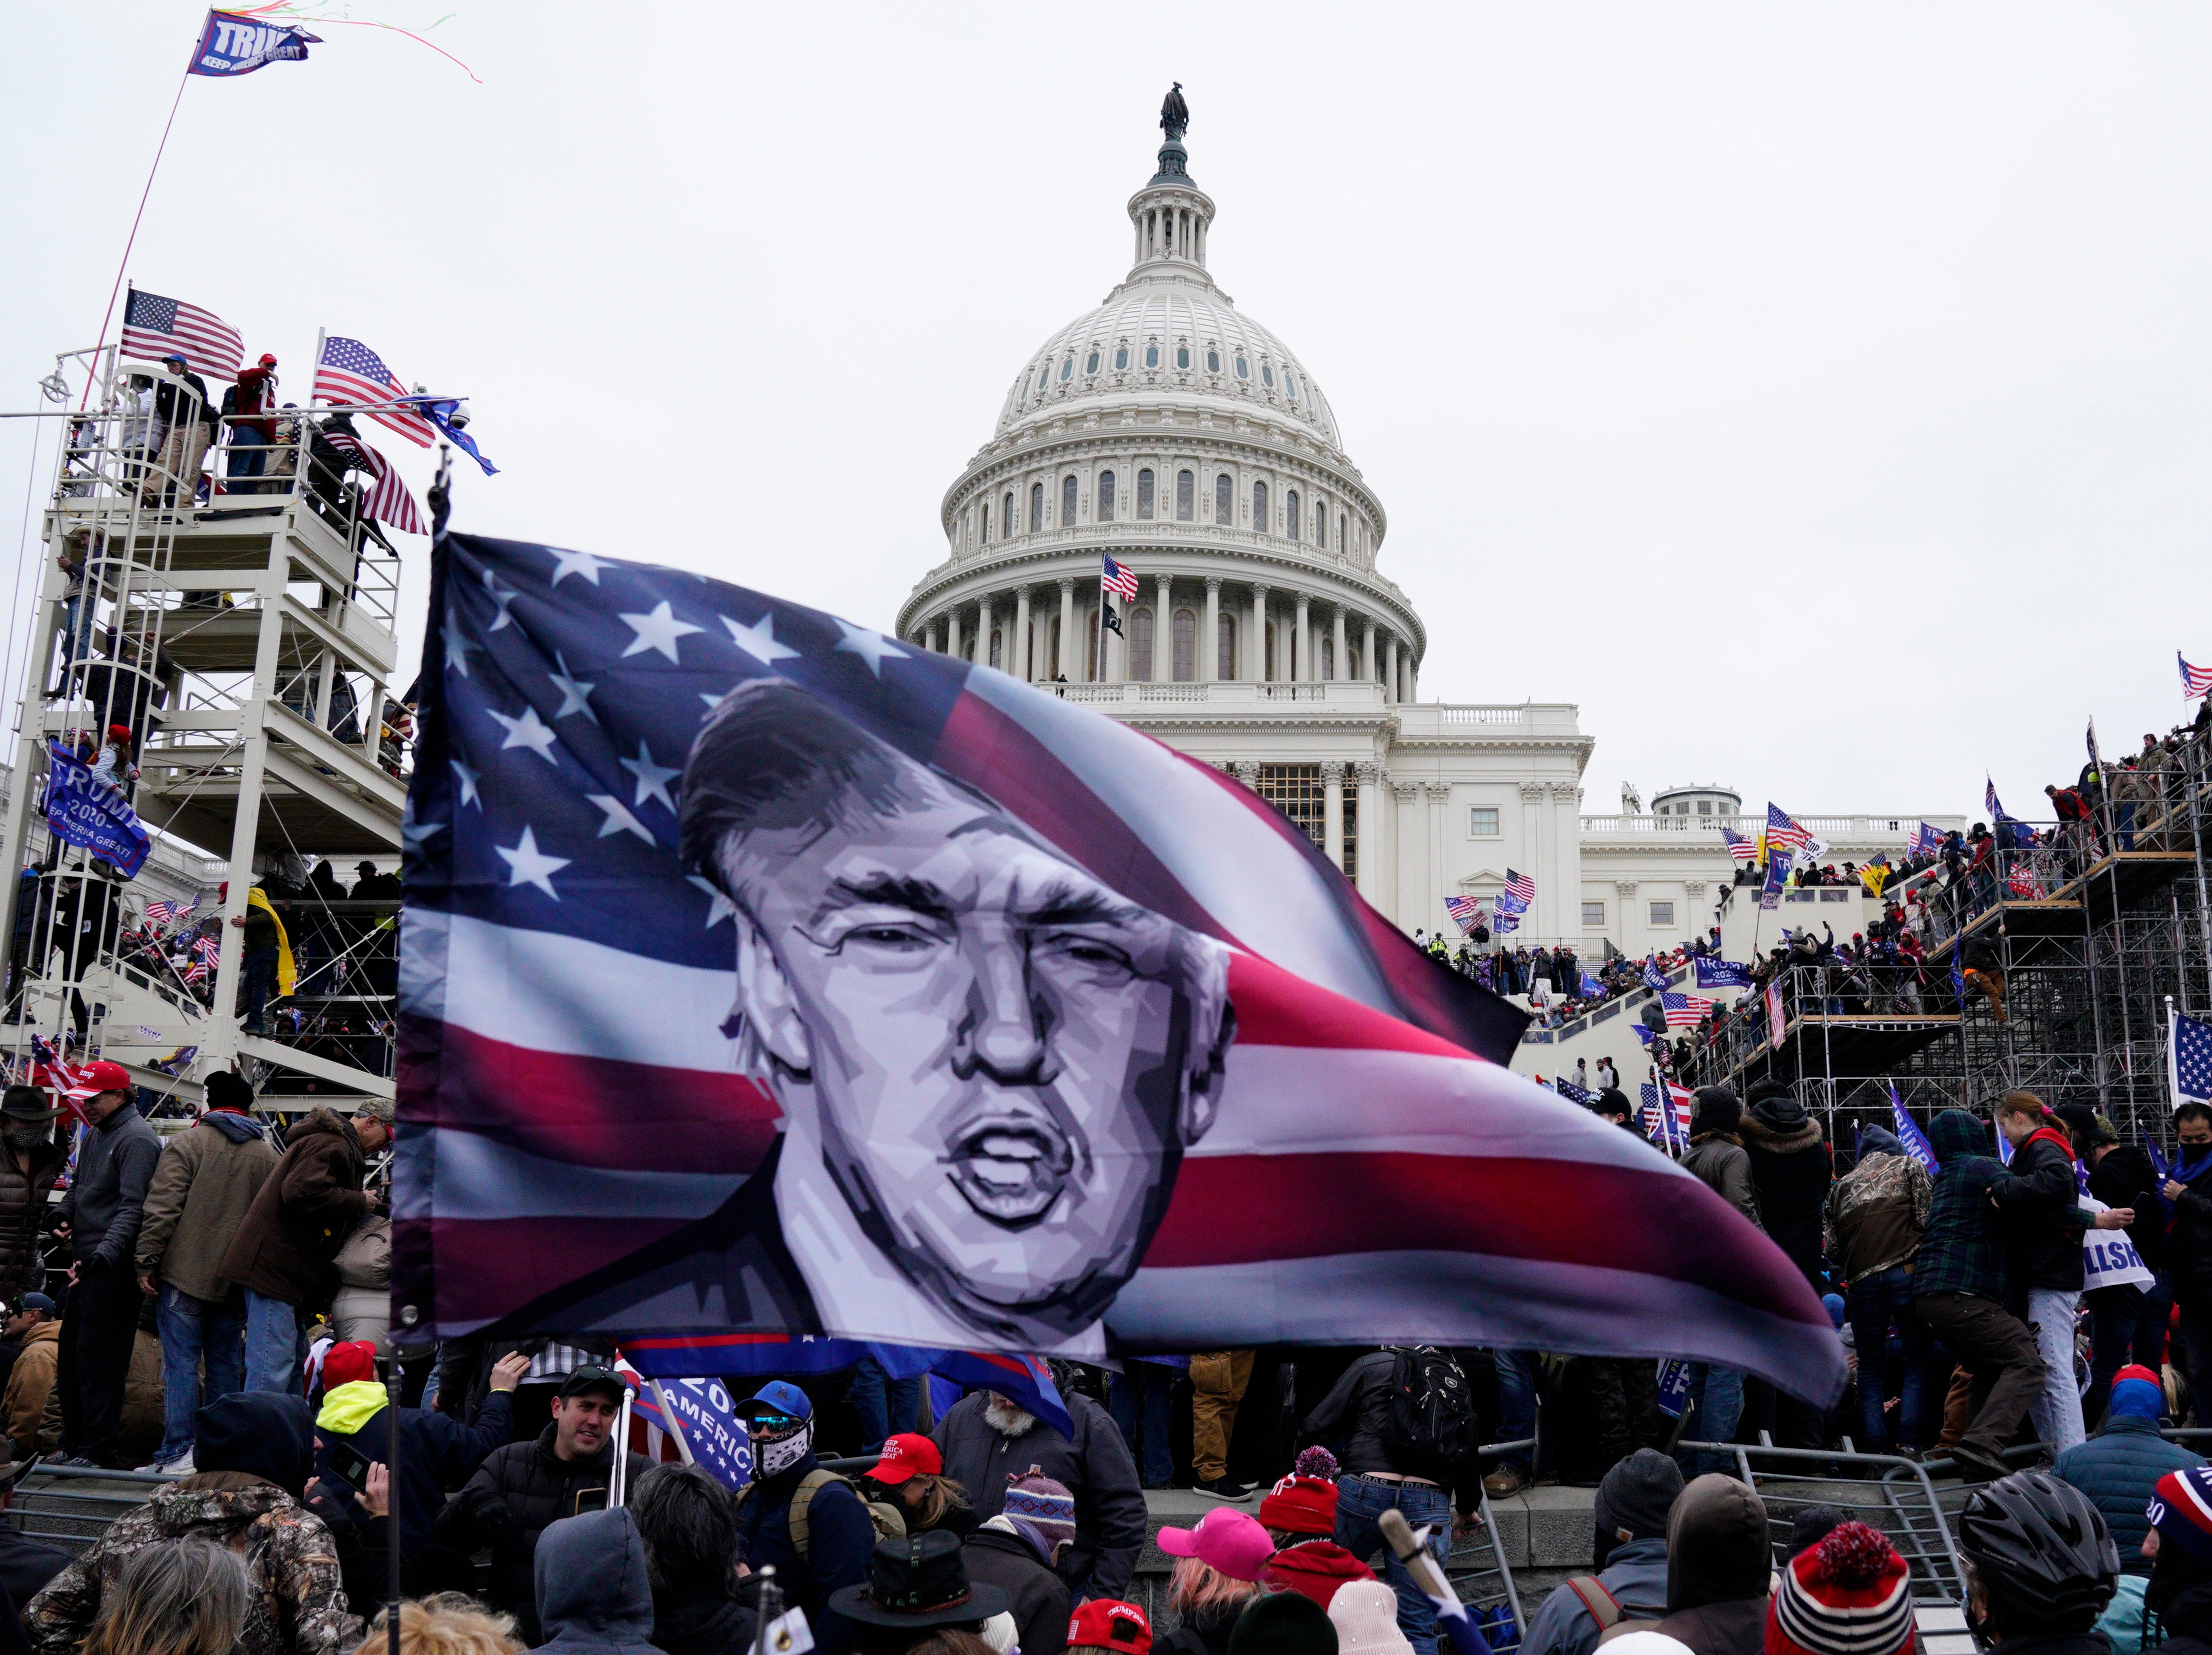 Trump supporters storm the US Capitol in his name